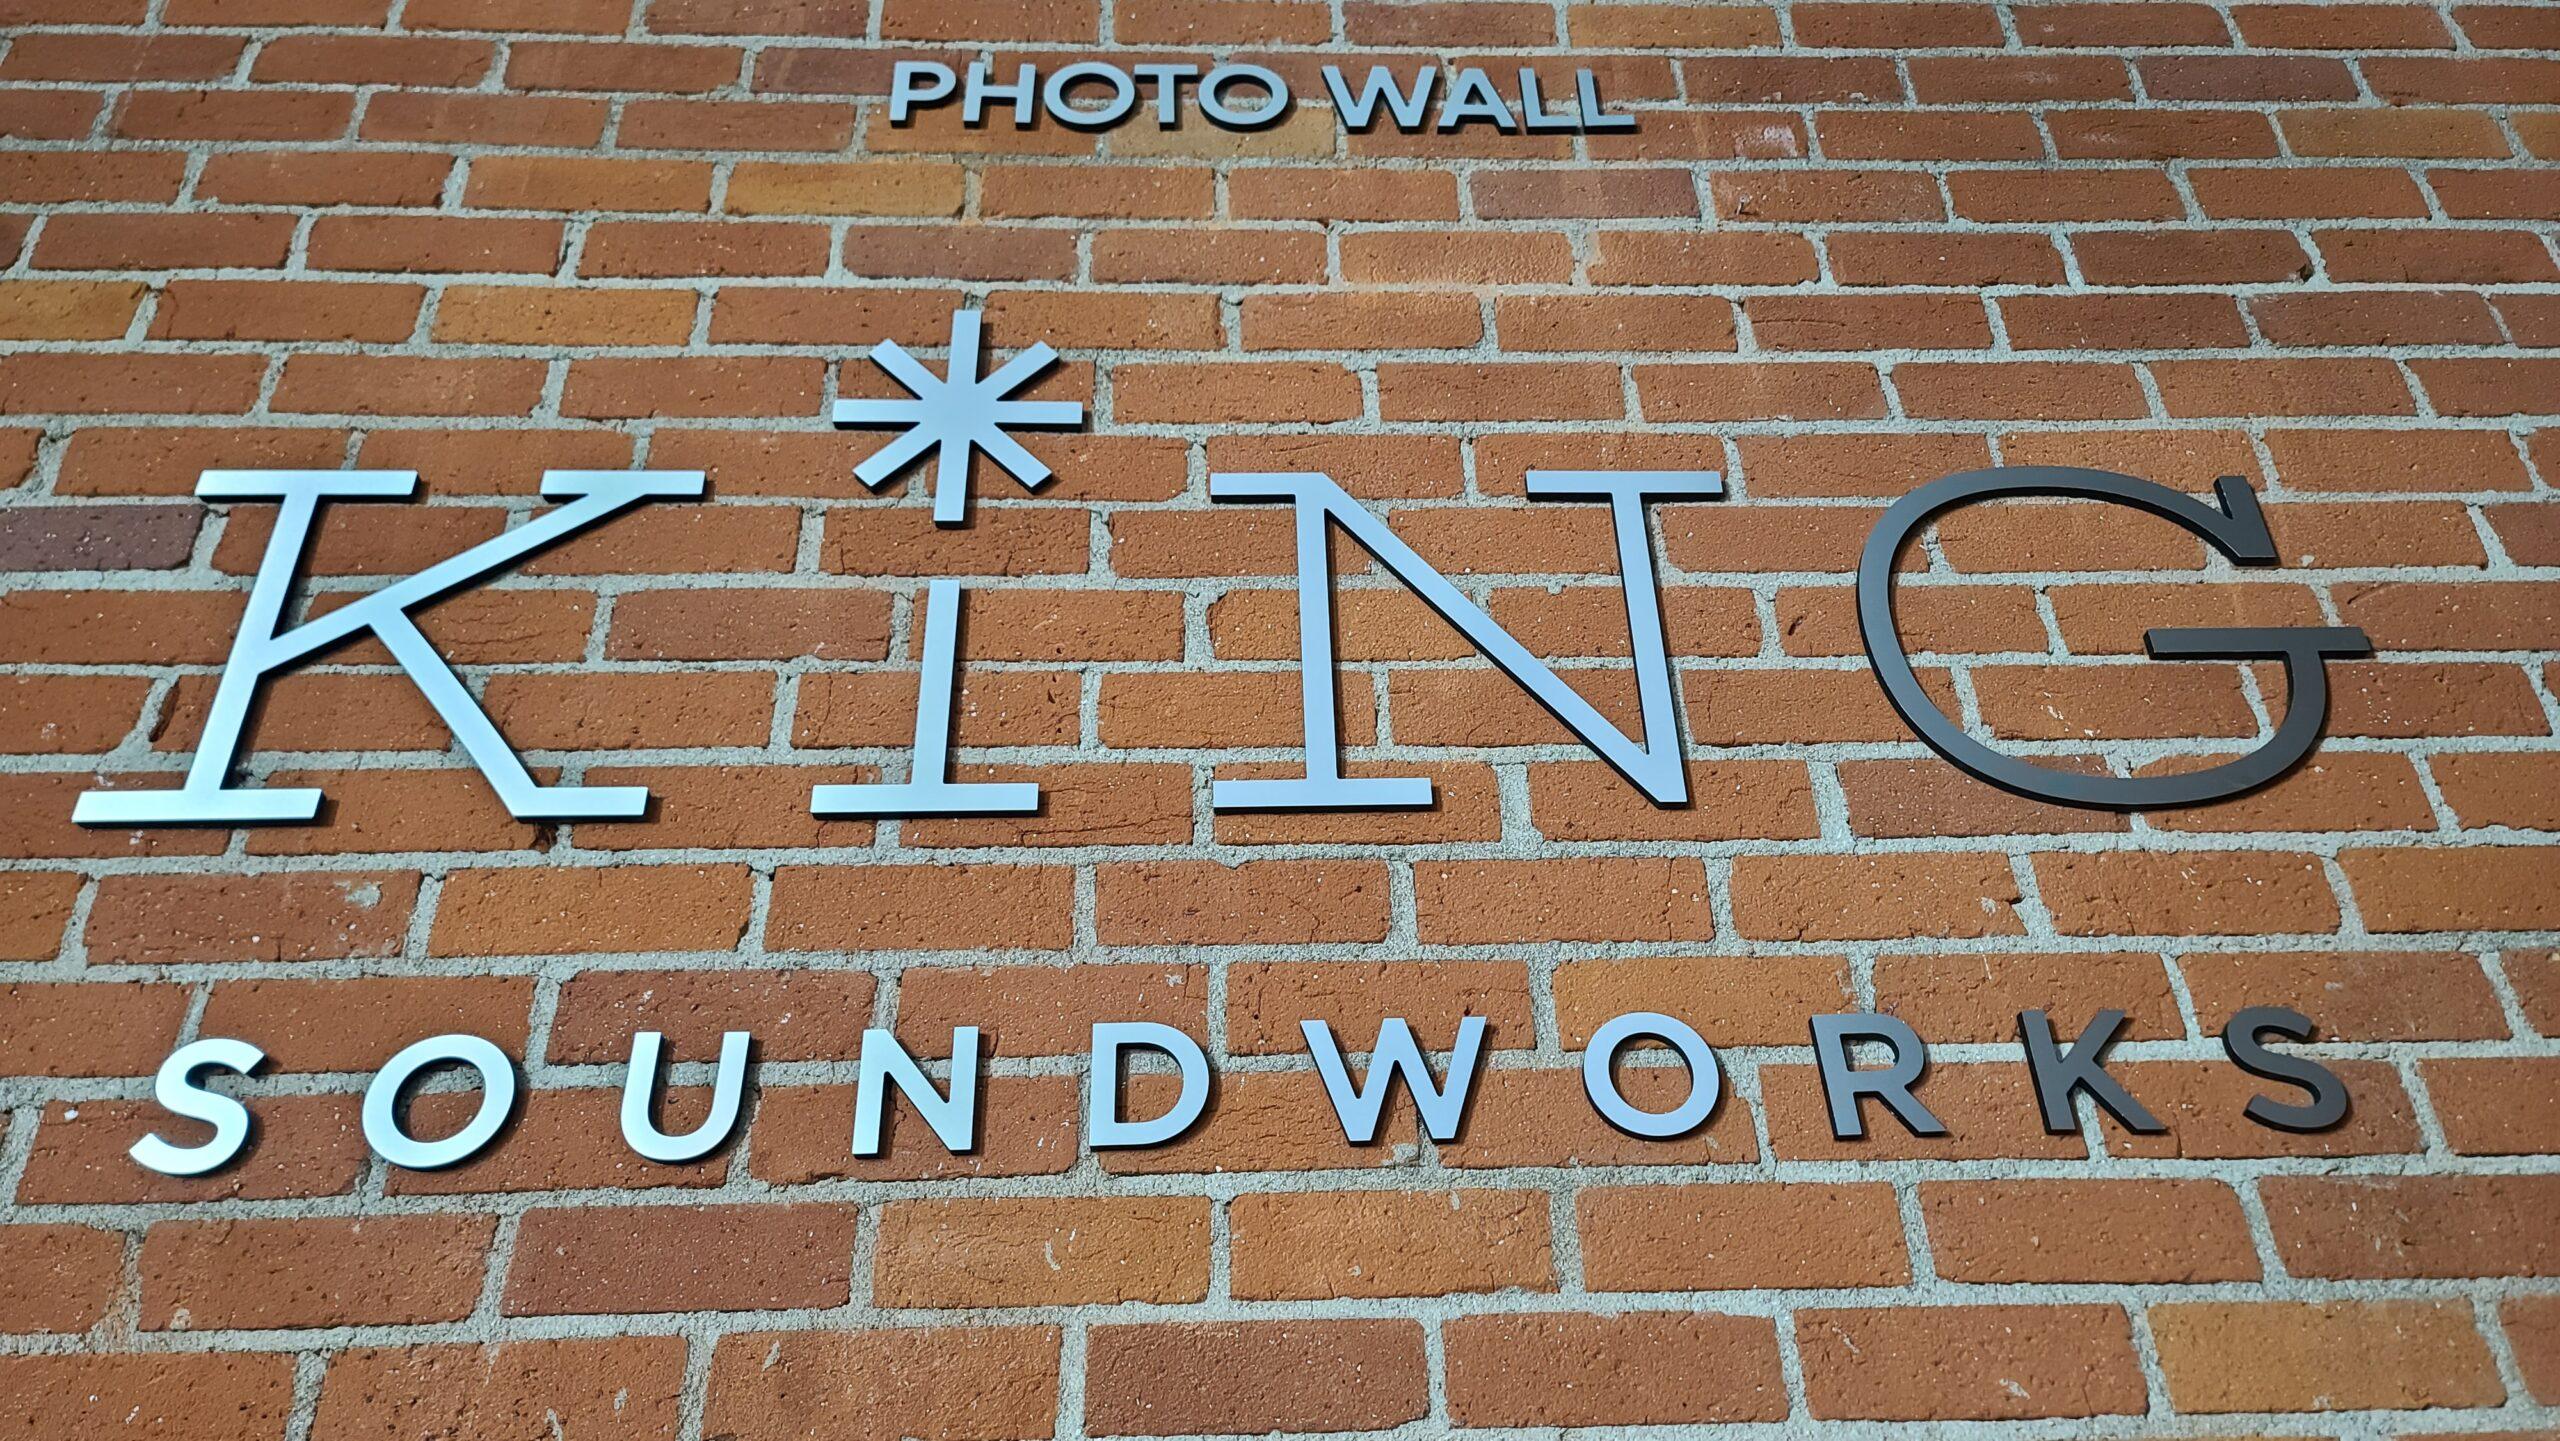 More from our sign package for King Soundworks' studio in Burbank. This is lobby sign is comprised of black acrylic with brushed metal faces. Los Angeles sign company serving San Fernando Valley, Tarzana, Pomona and all of Southern California. Premium Sign Solutions Specializing in Storefront Signs, Lobby Signs, Indoor Signs and Outdoor Signs for Businesses.